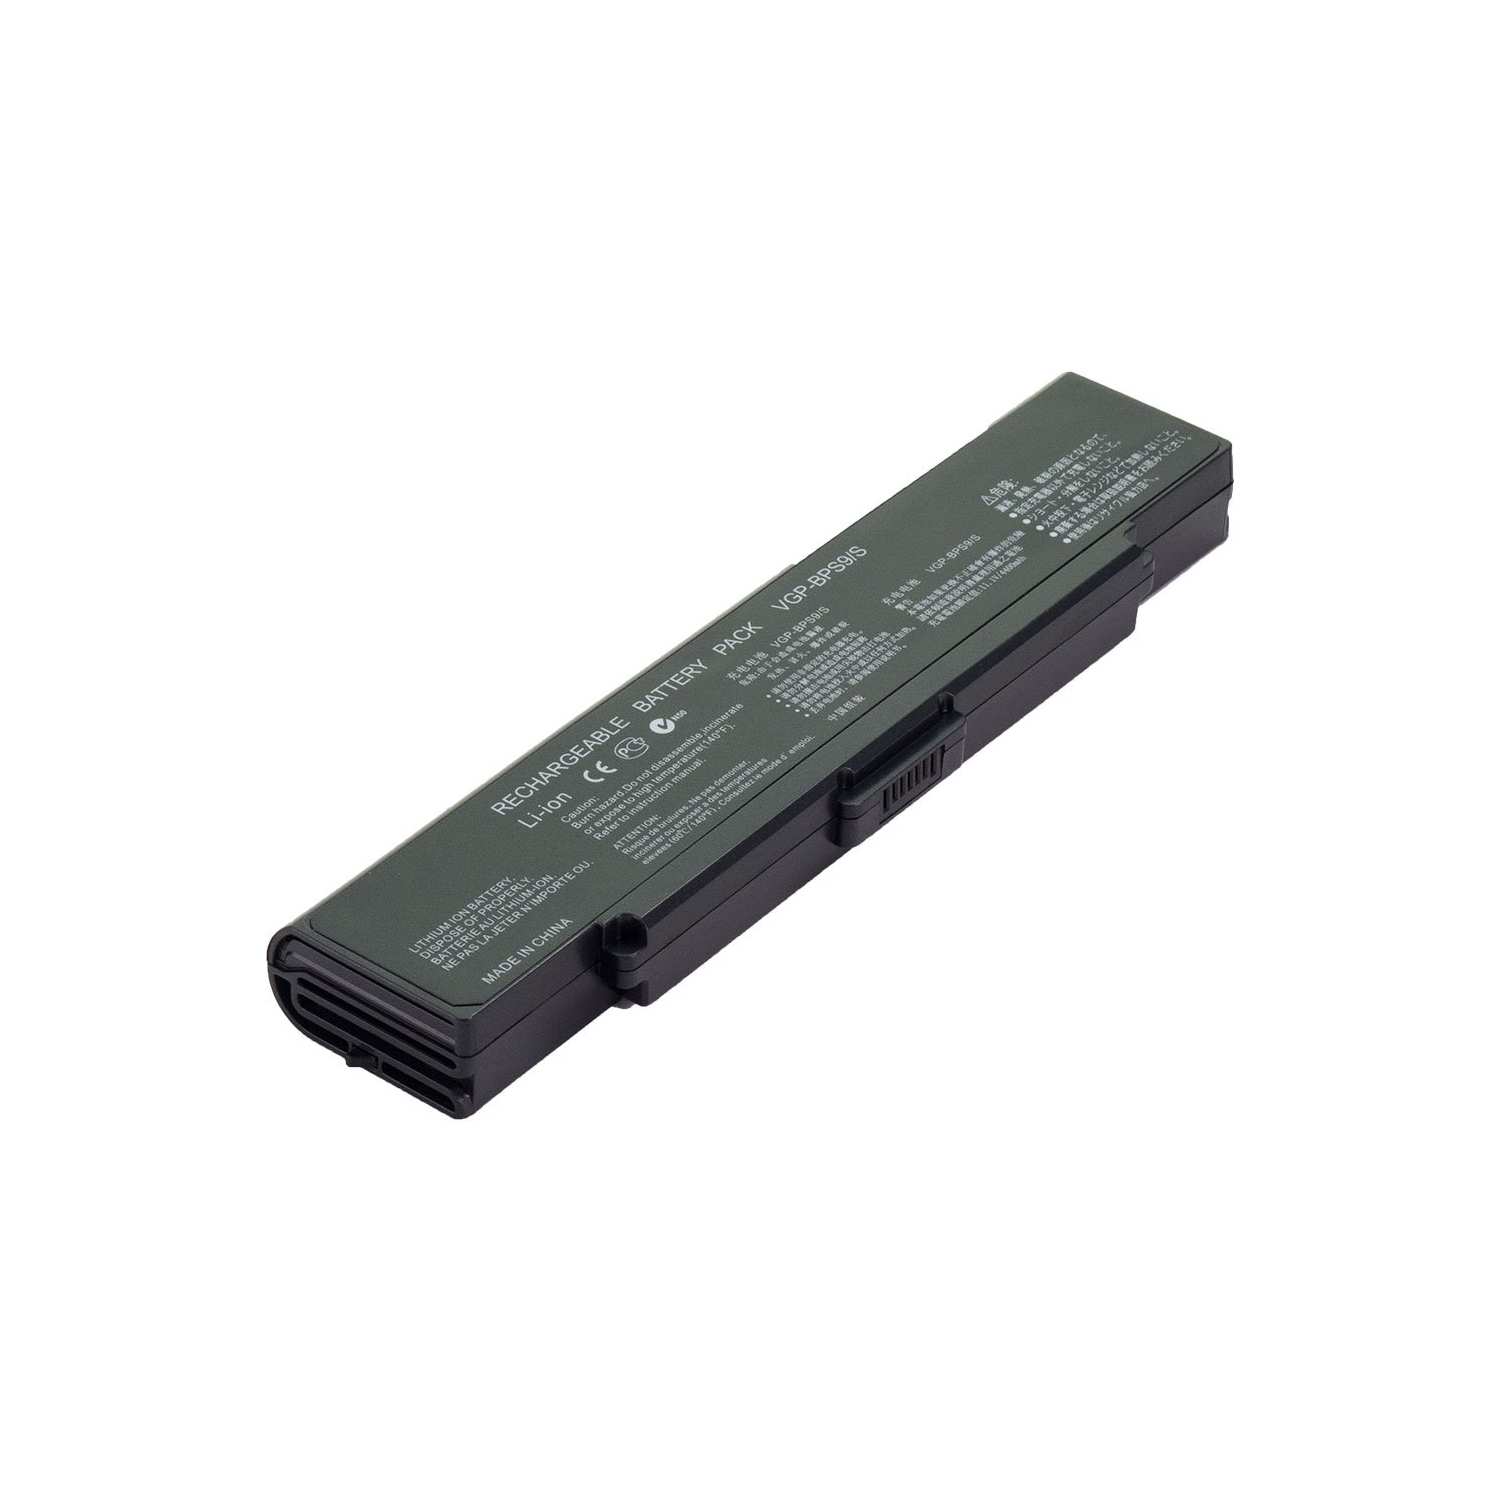 Laptop Battery Replacement for Sony VAIO VGN-NR490E/P, VGP-BPL9, VGP-BPS10/S, VGP-BPS10A/B, VGP-BPS9A, VGP-BPS9B